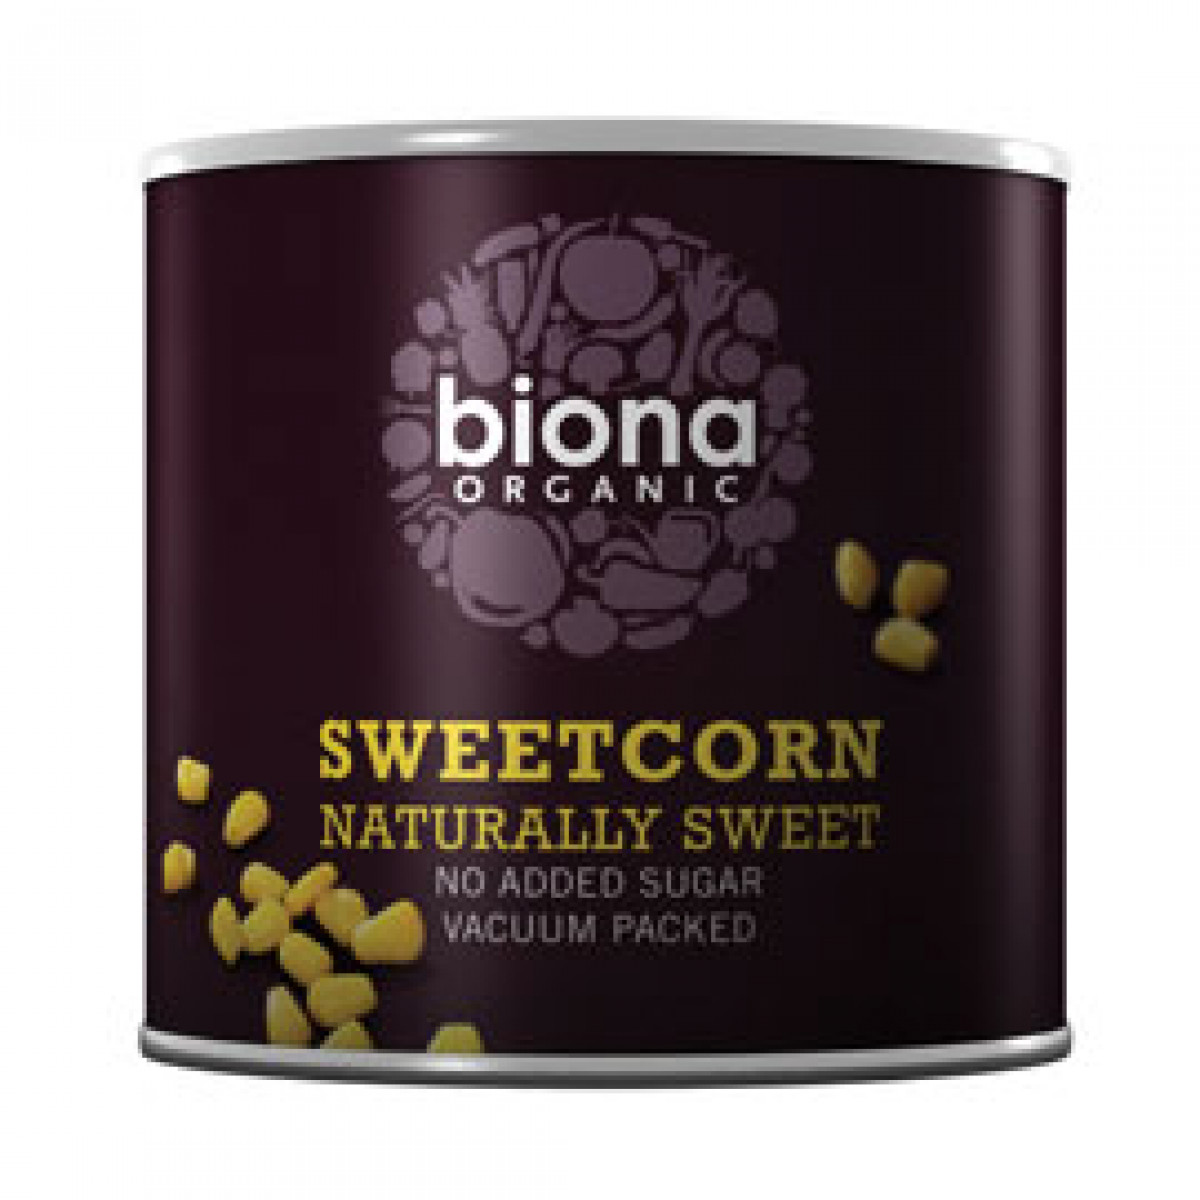 Product picture for Sweetcorn - tinned